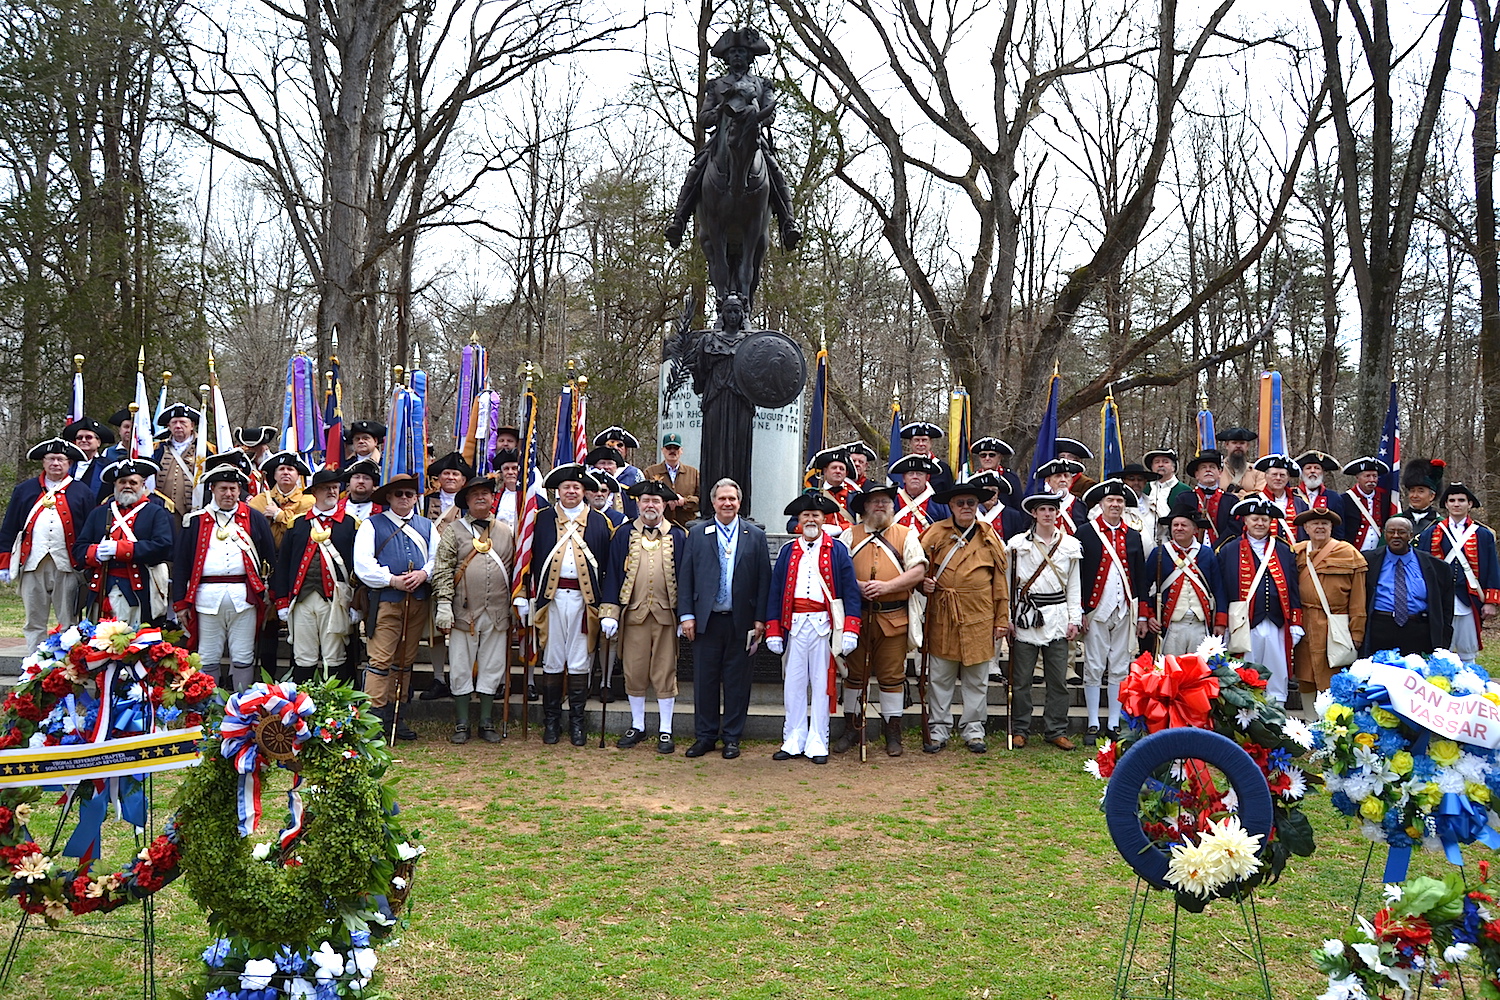 The National SAR gathers for a photo following the ceremony.